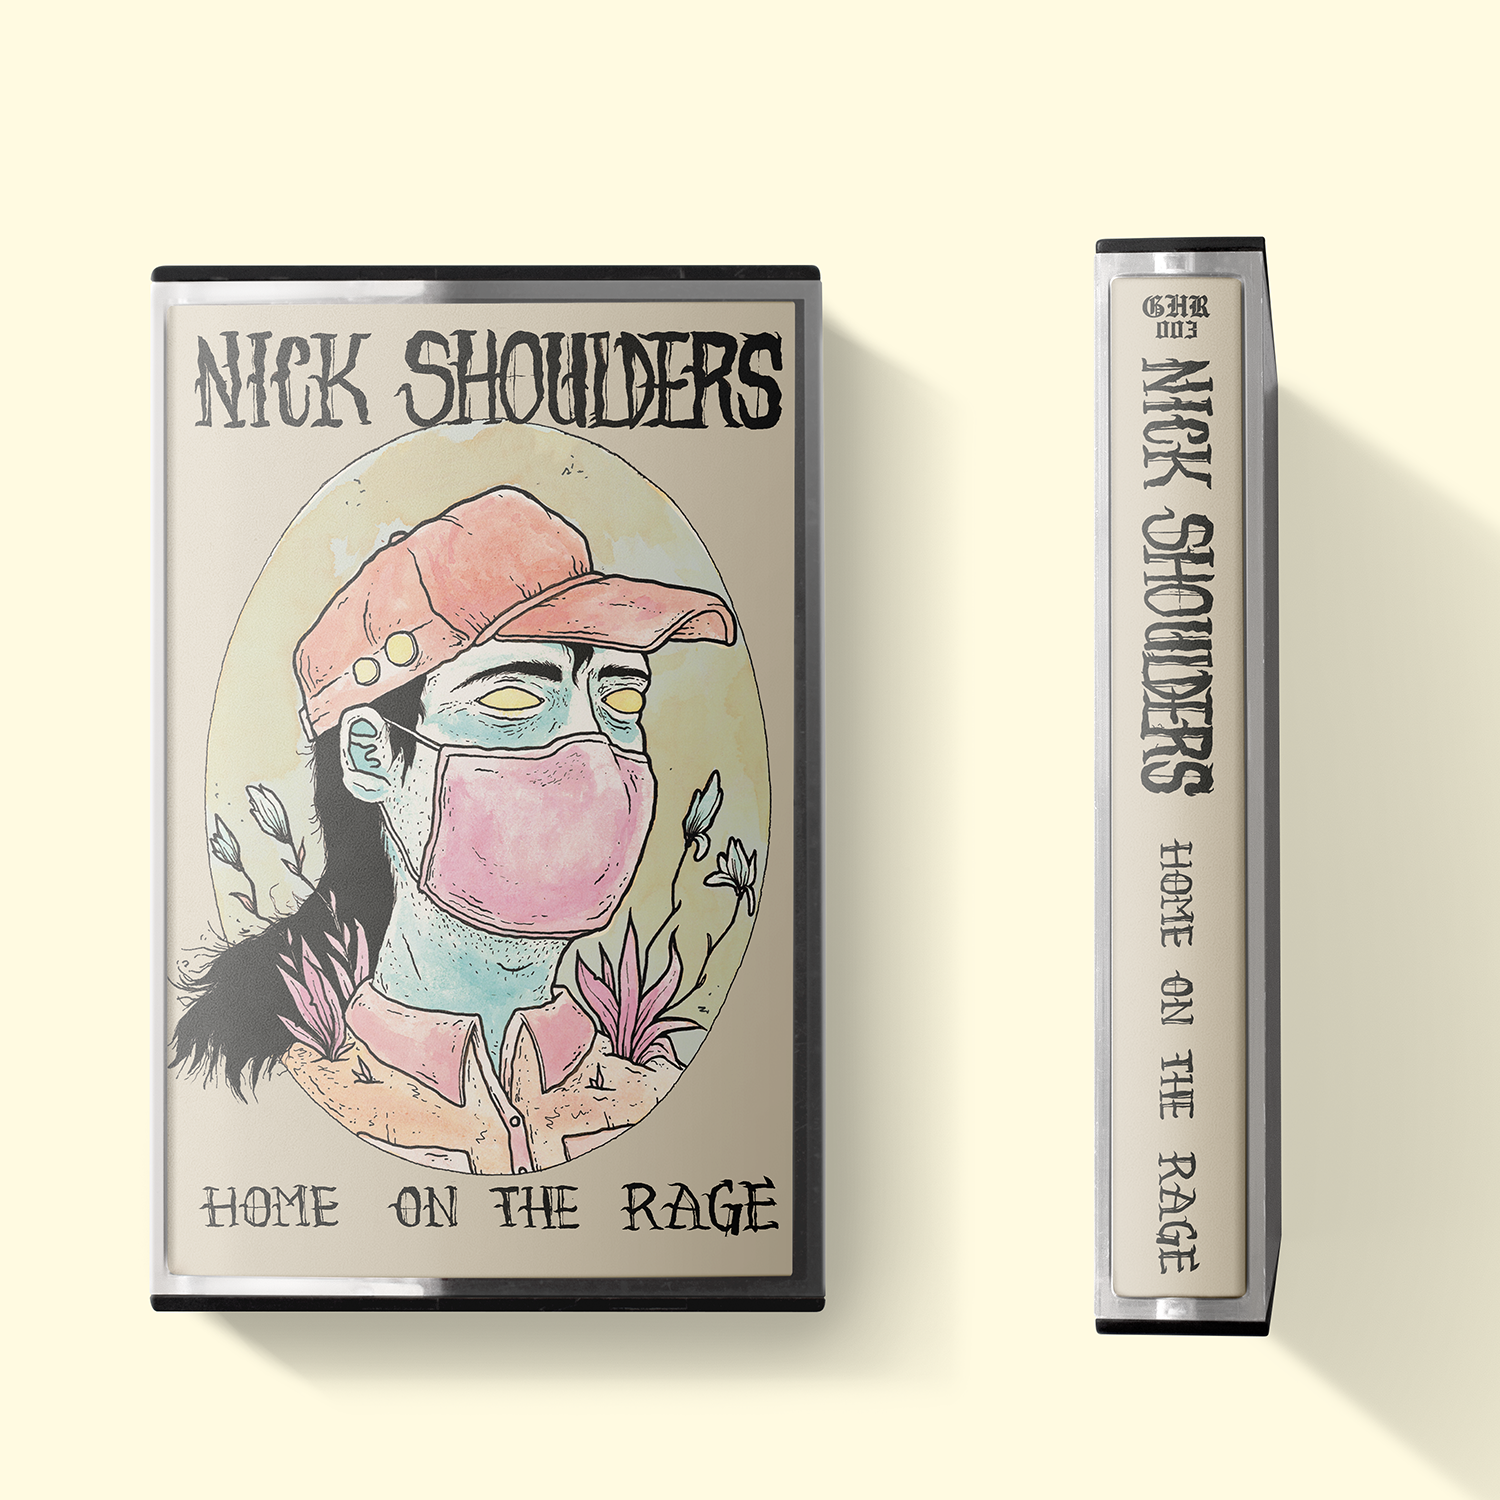 Nick Shoulders - "Home on the Rage" Cassette